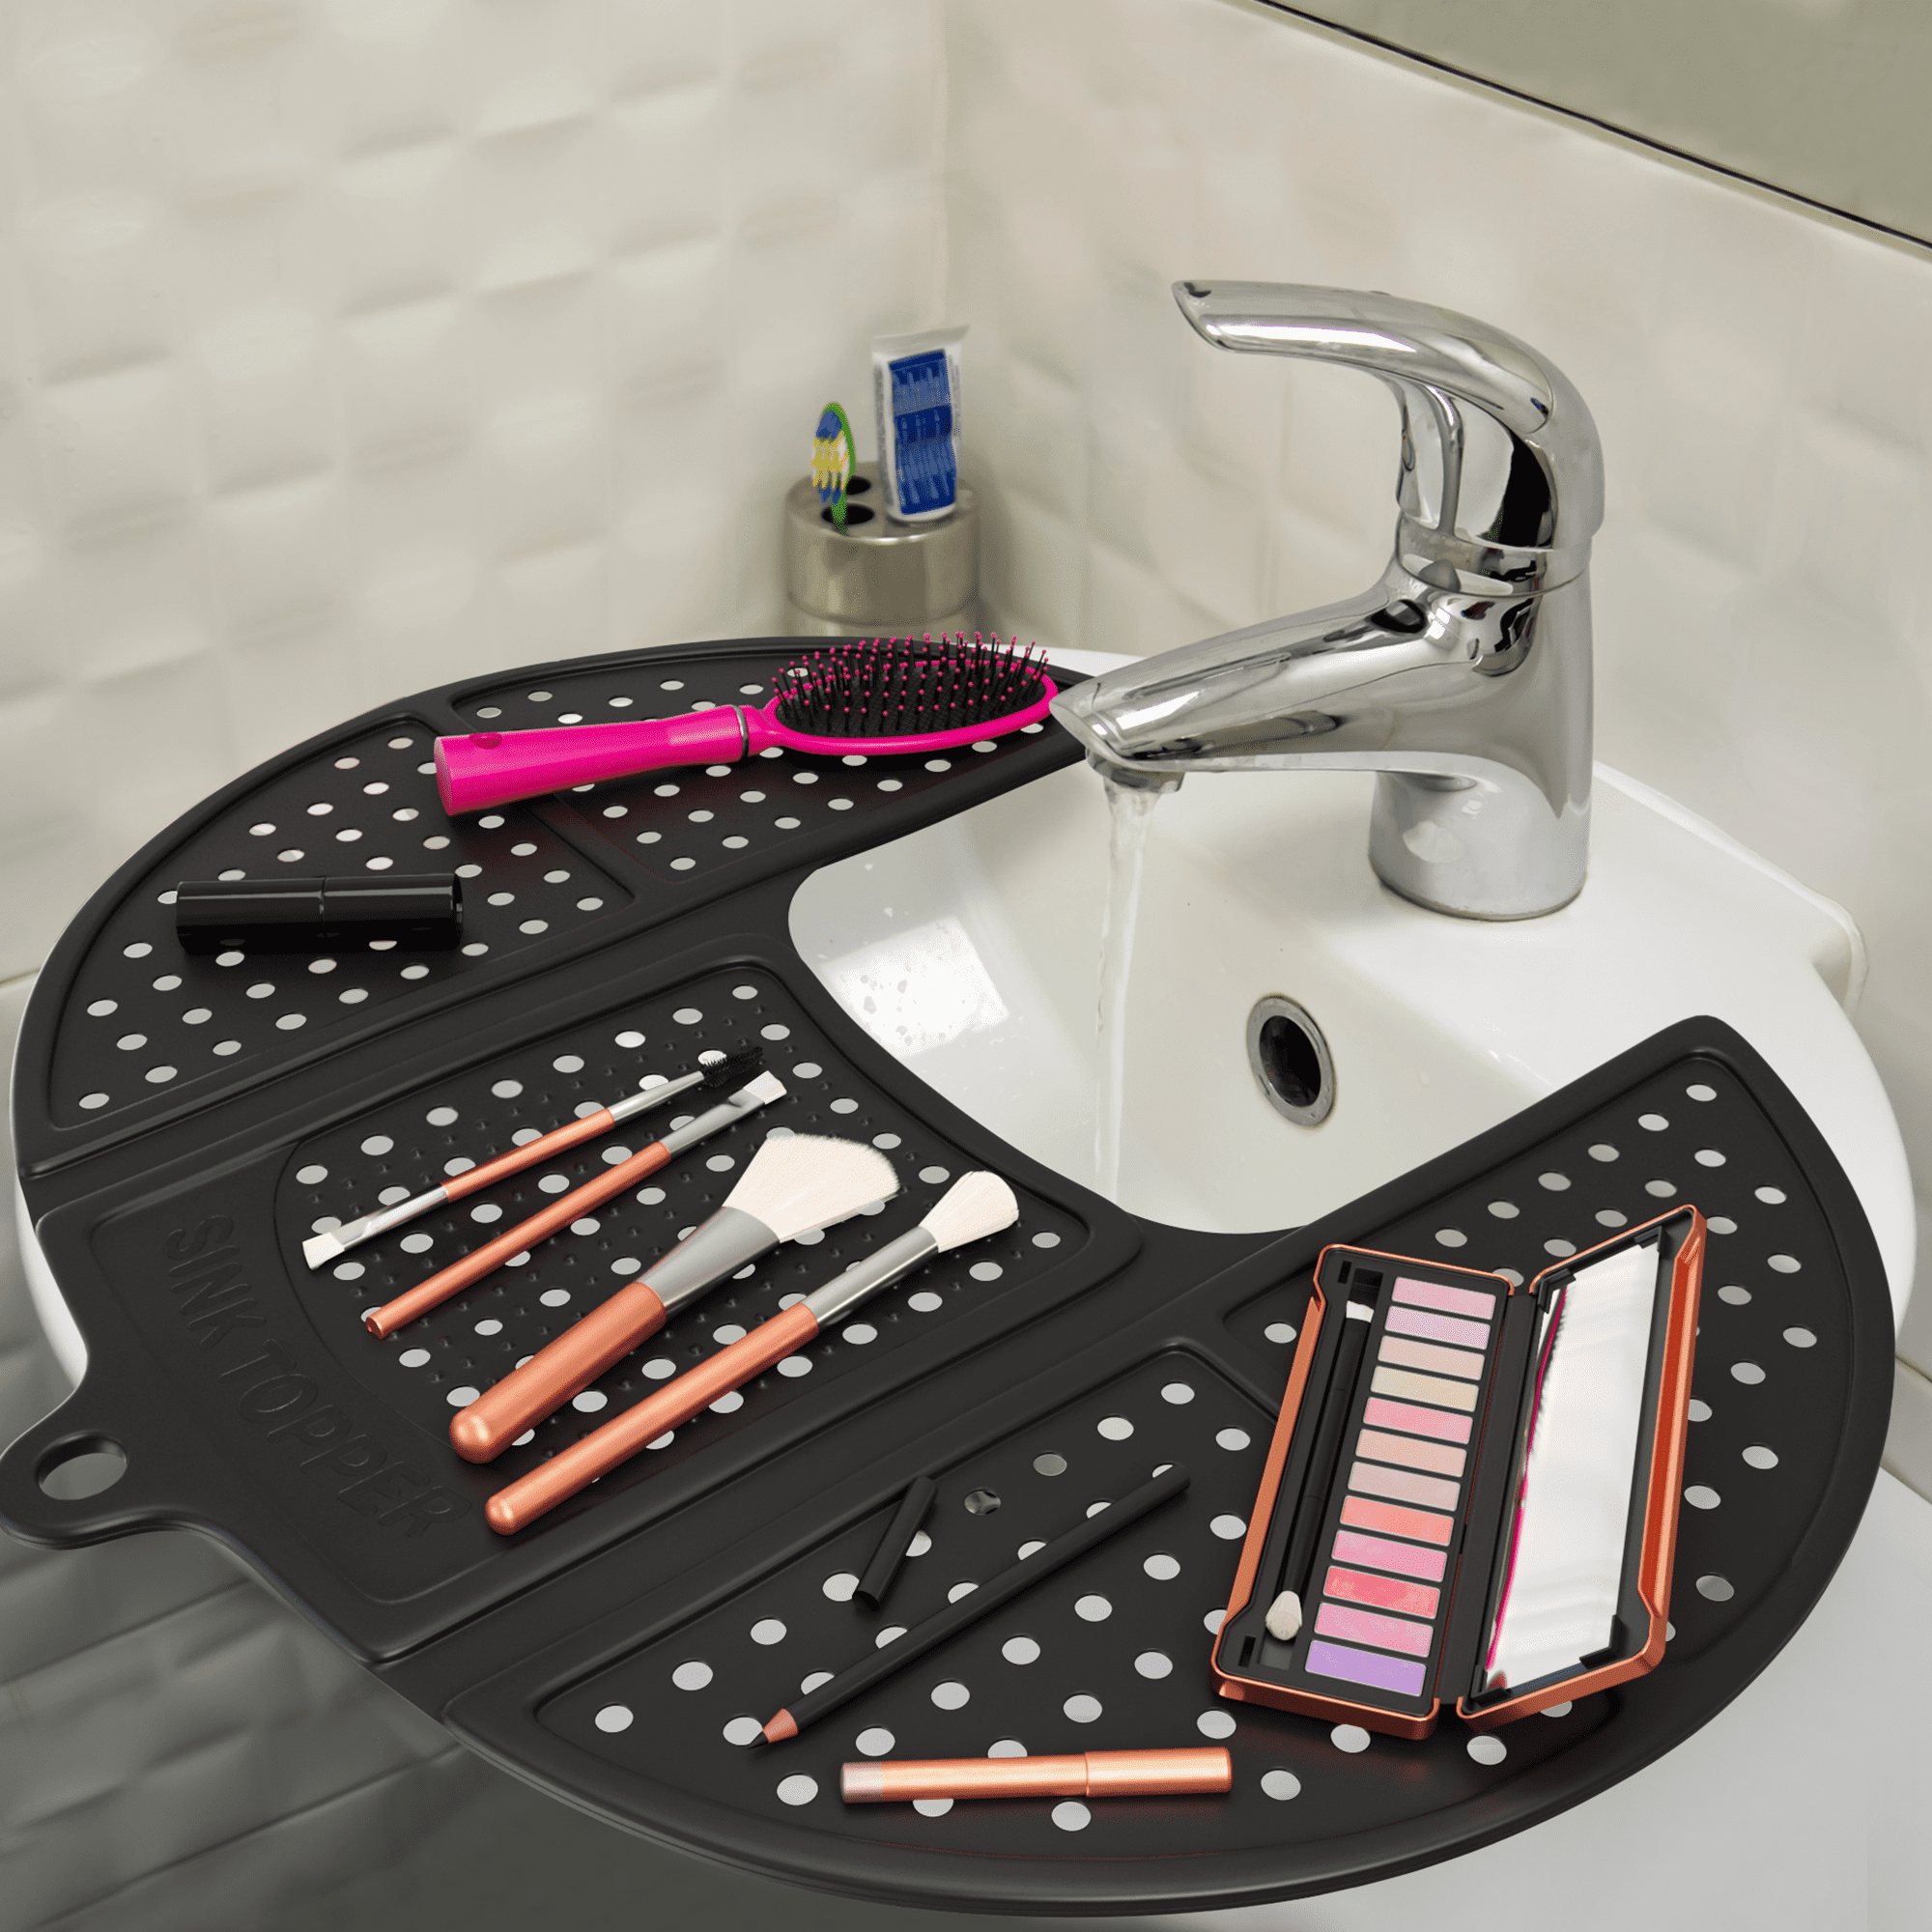 Sink Topper Cover for Bathroom Counter Spaces Organizer Makeup Mat White